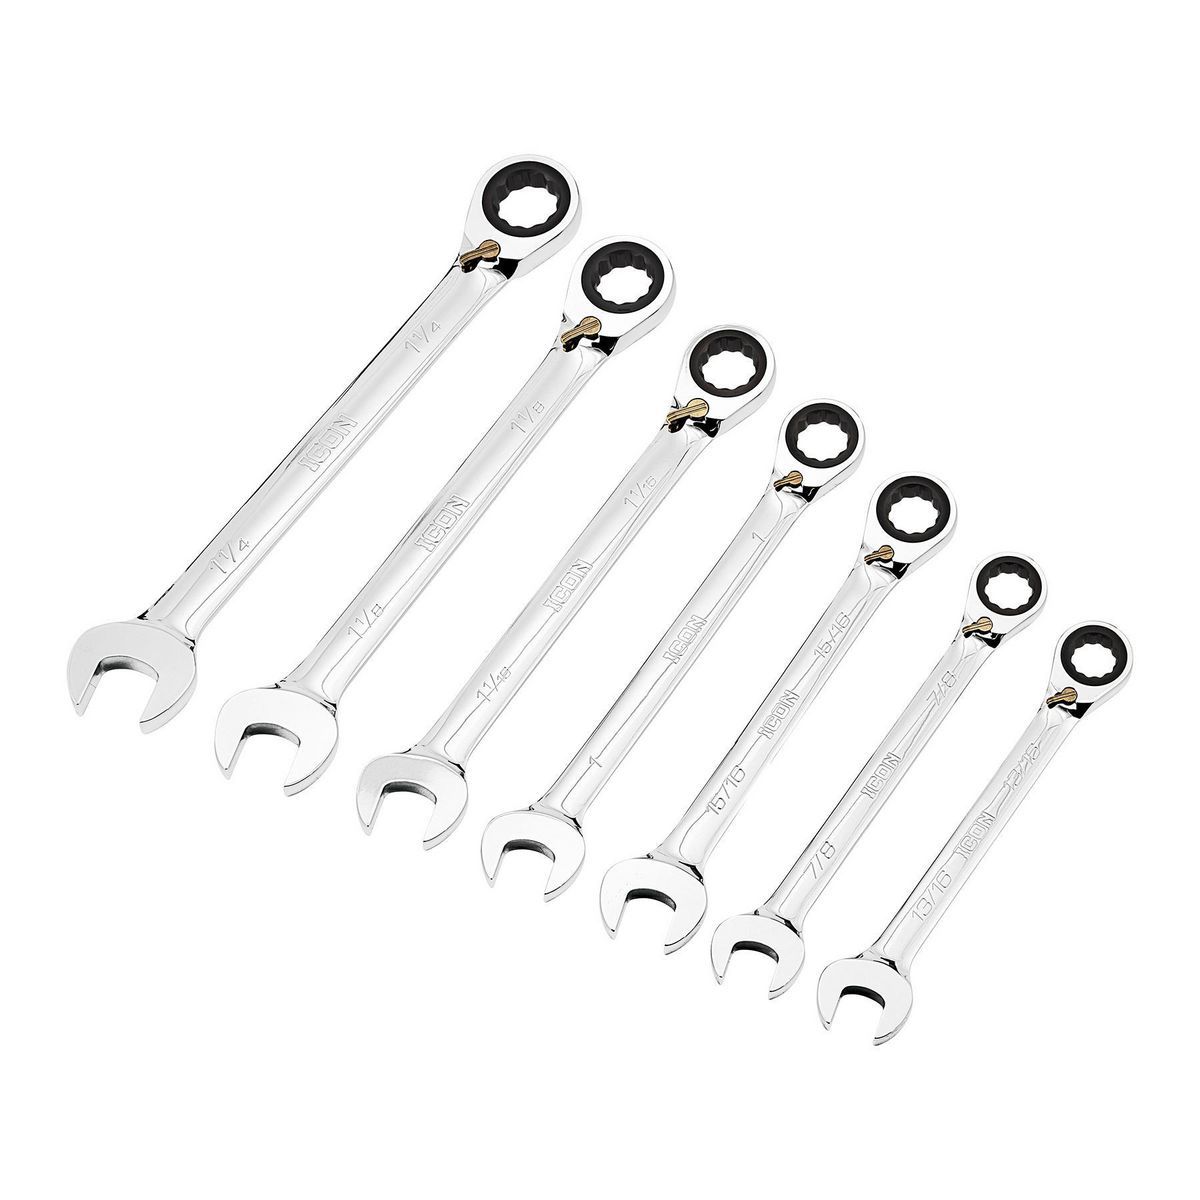 Professional Large Reversible SAE Ratcheting Combination Wrench Set, 7-Piece